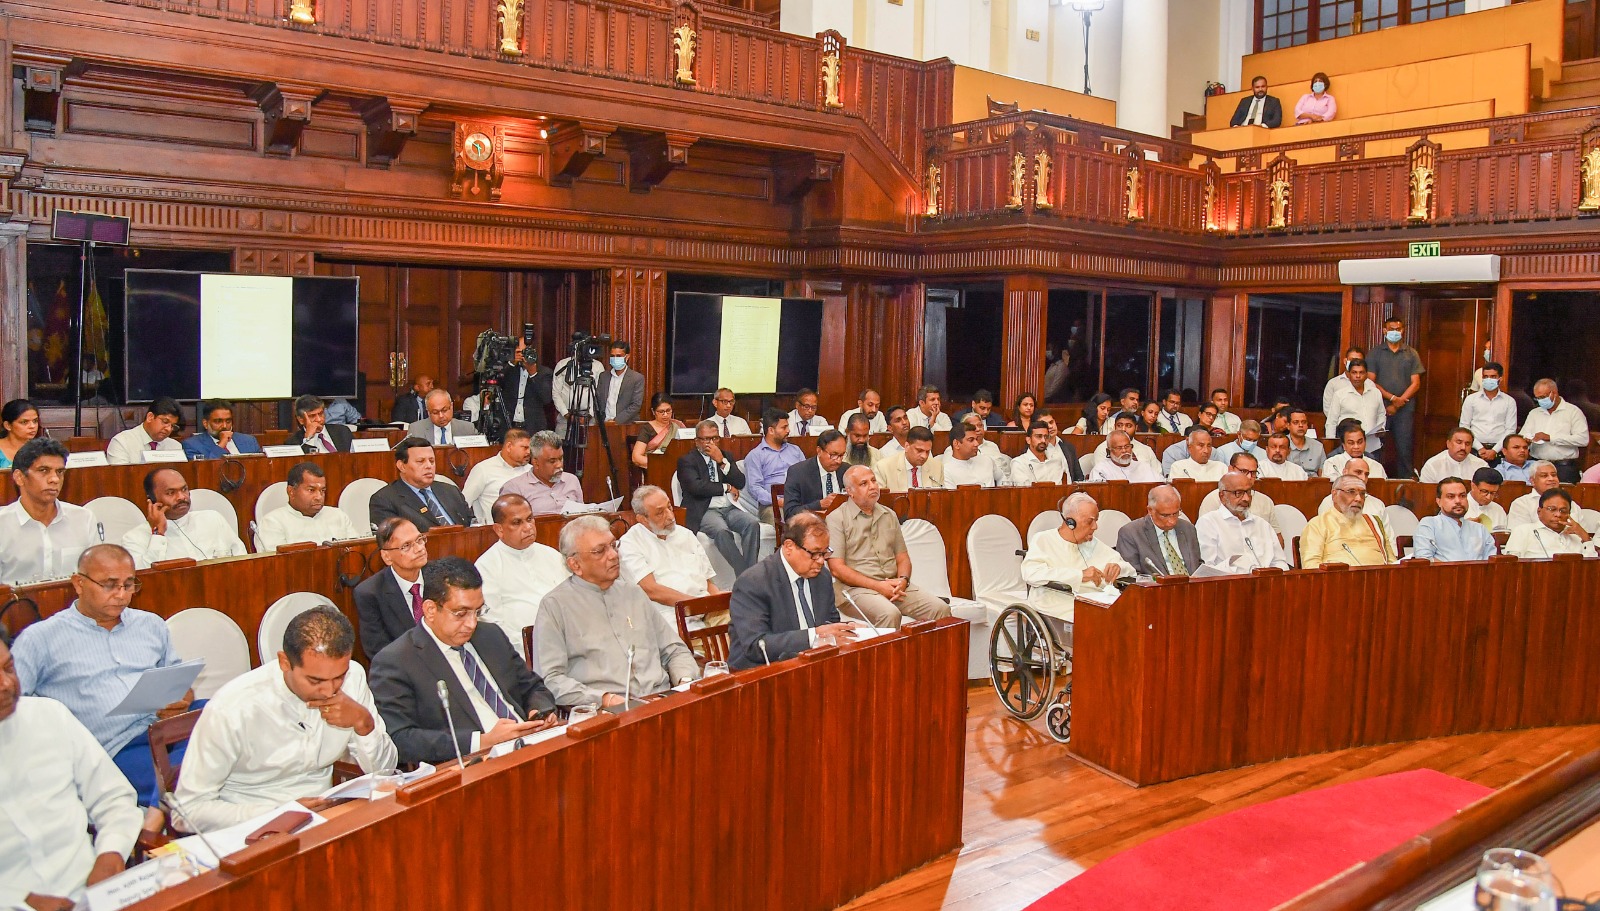 Primary aim is to discuss the 13th Amendment of the Constitution with all parties – President tells the All-Party Conference